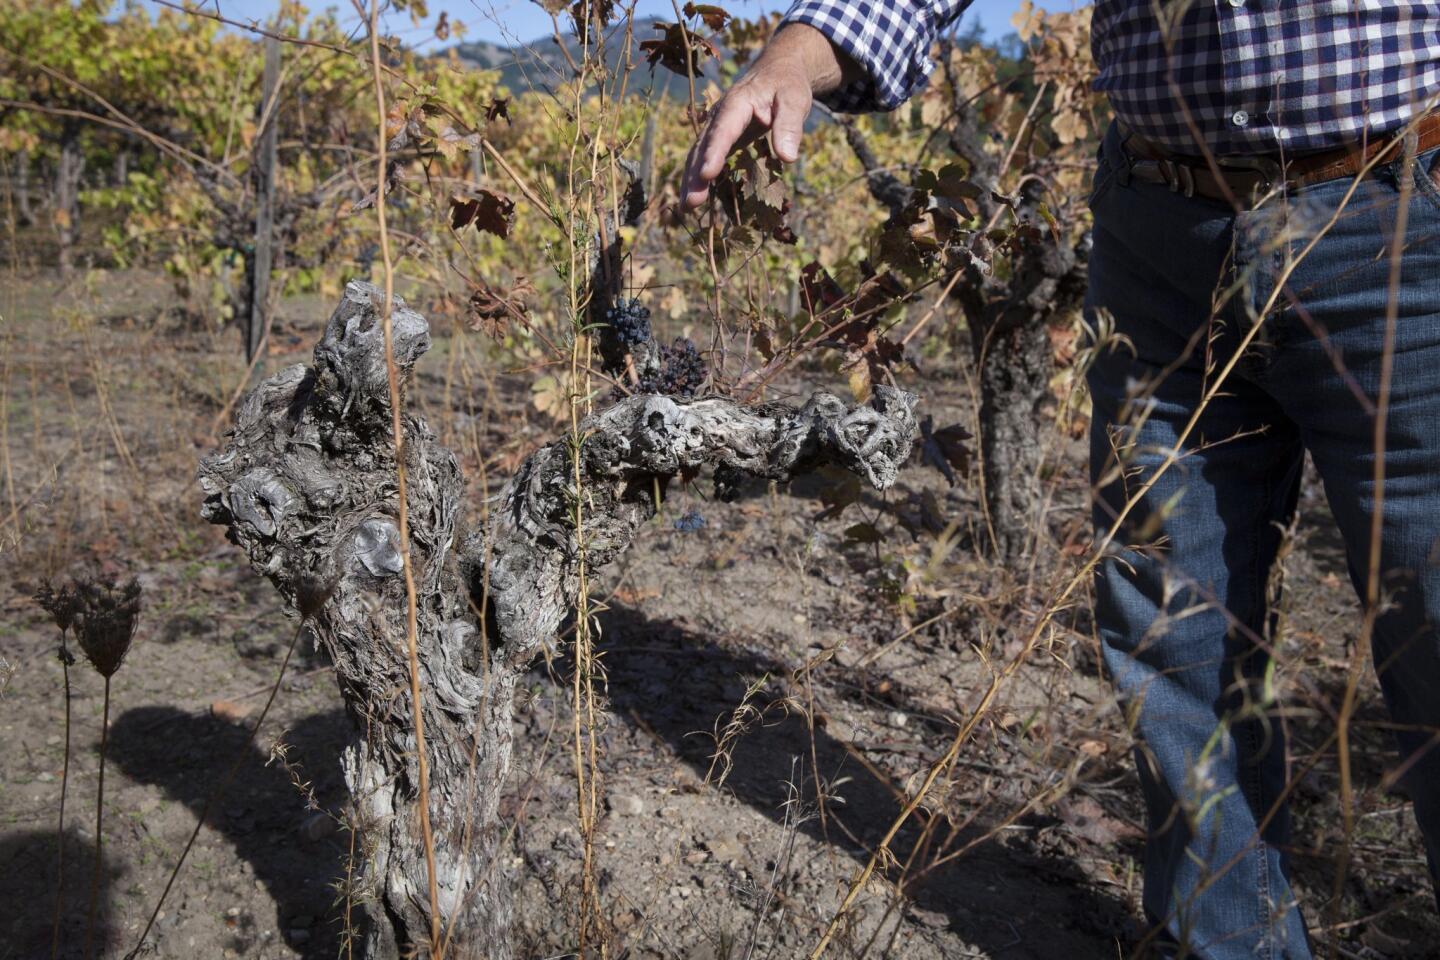 Drought raises wineries' interest in dry farming